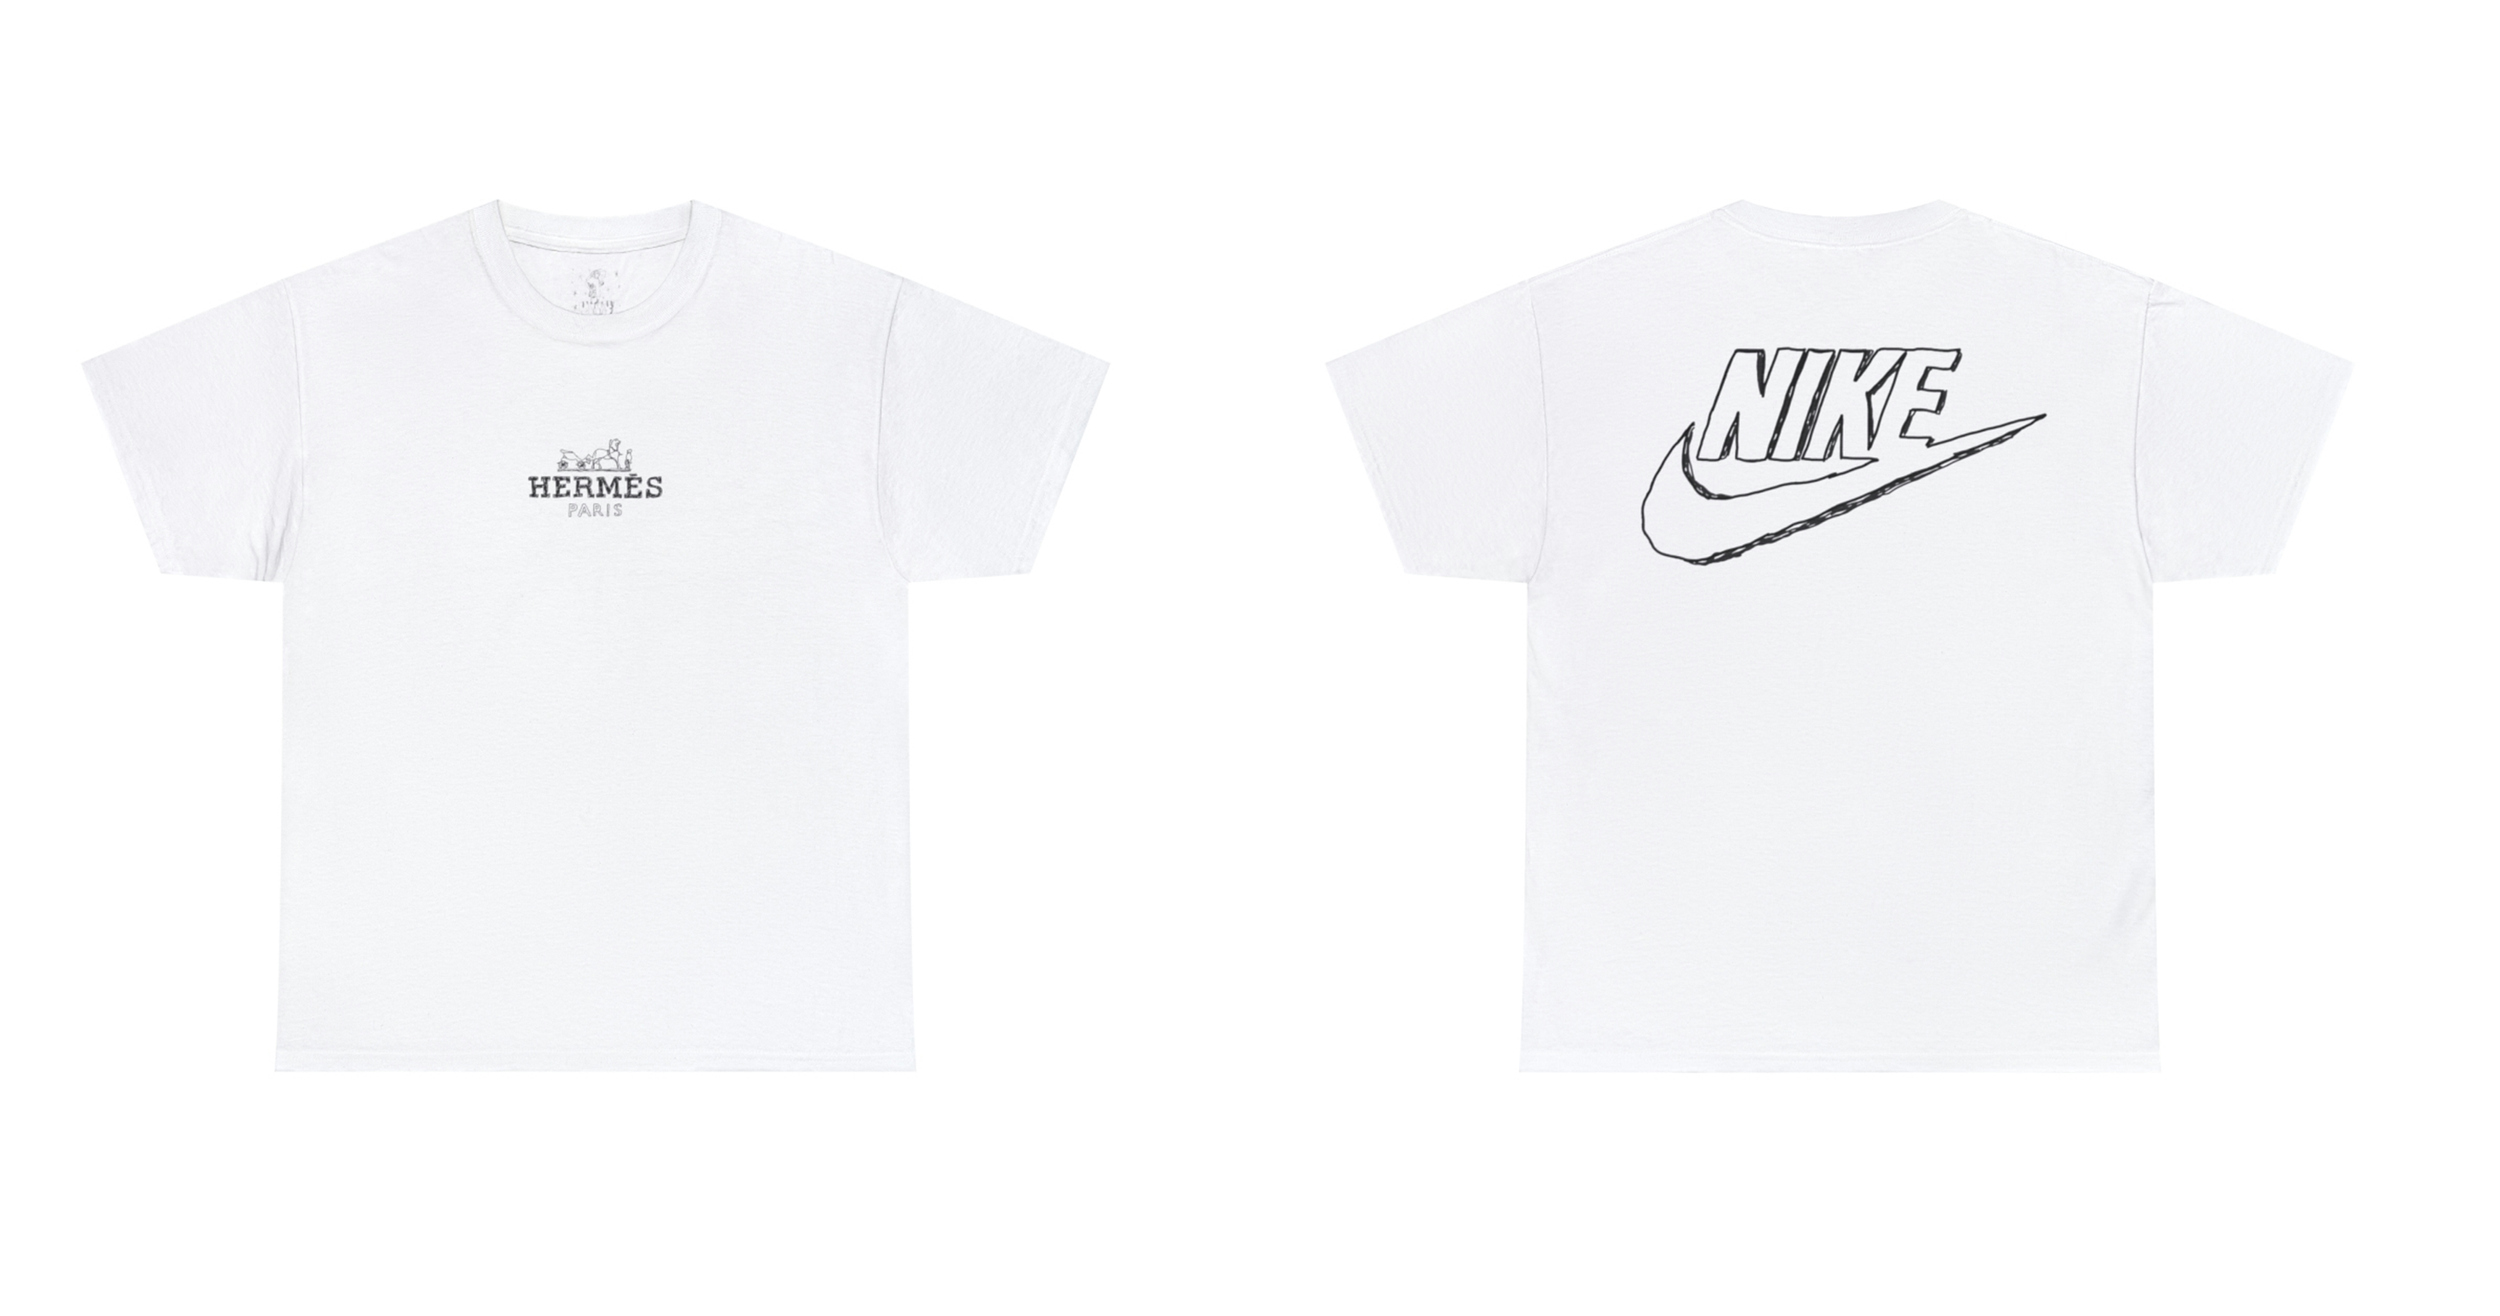 hermes and nike.png